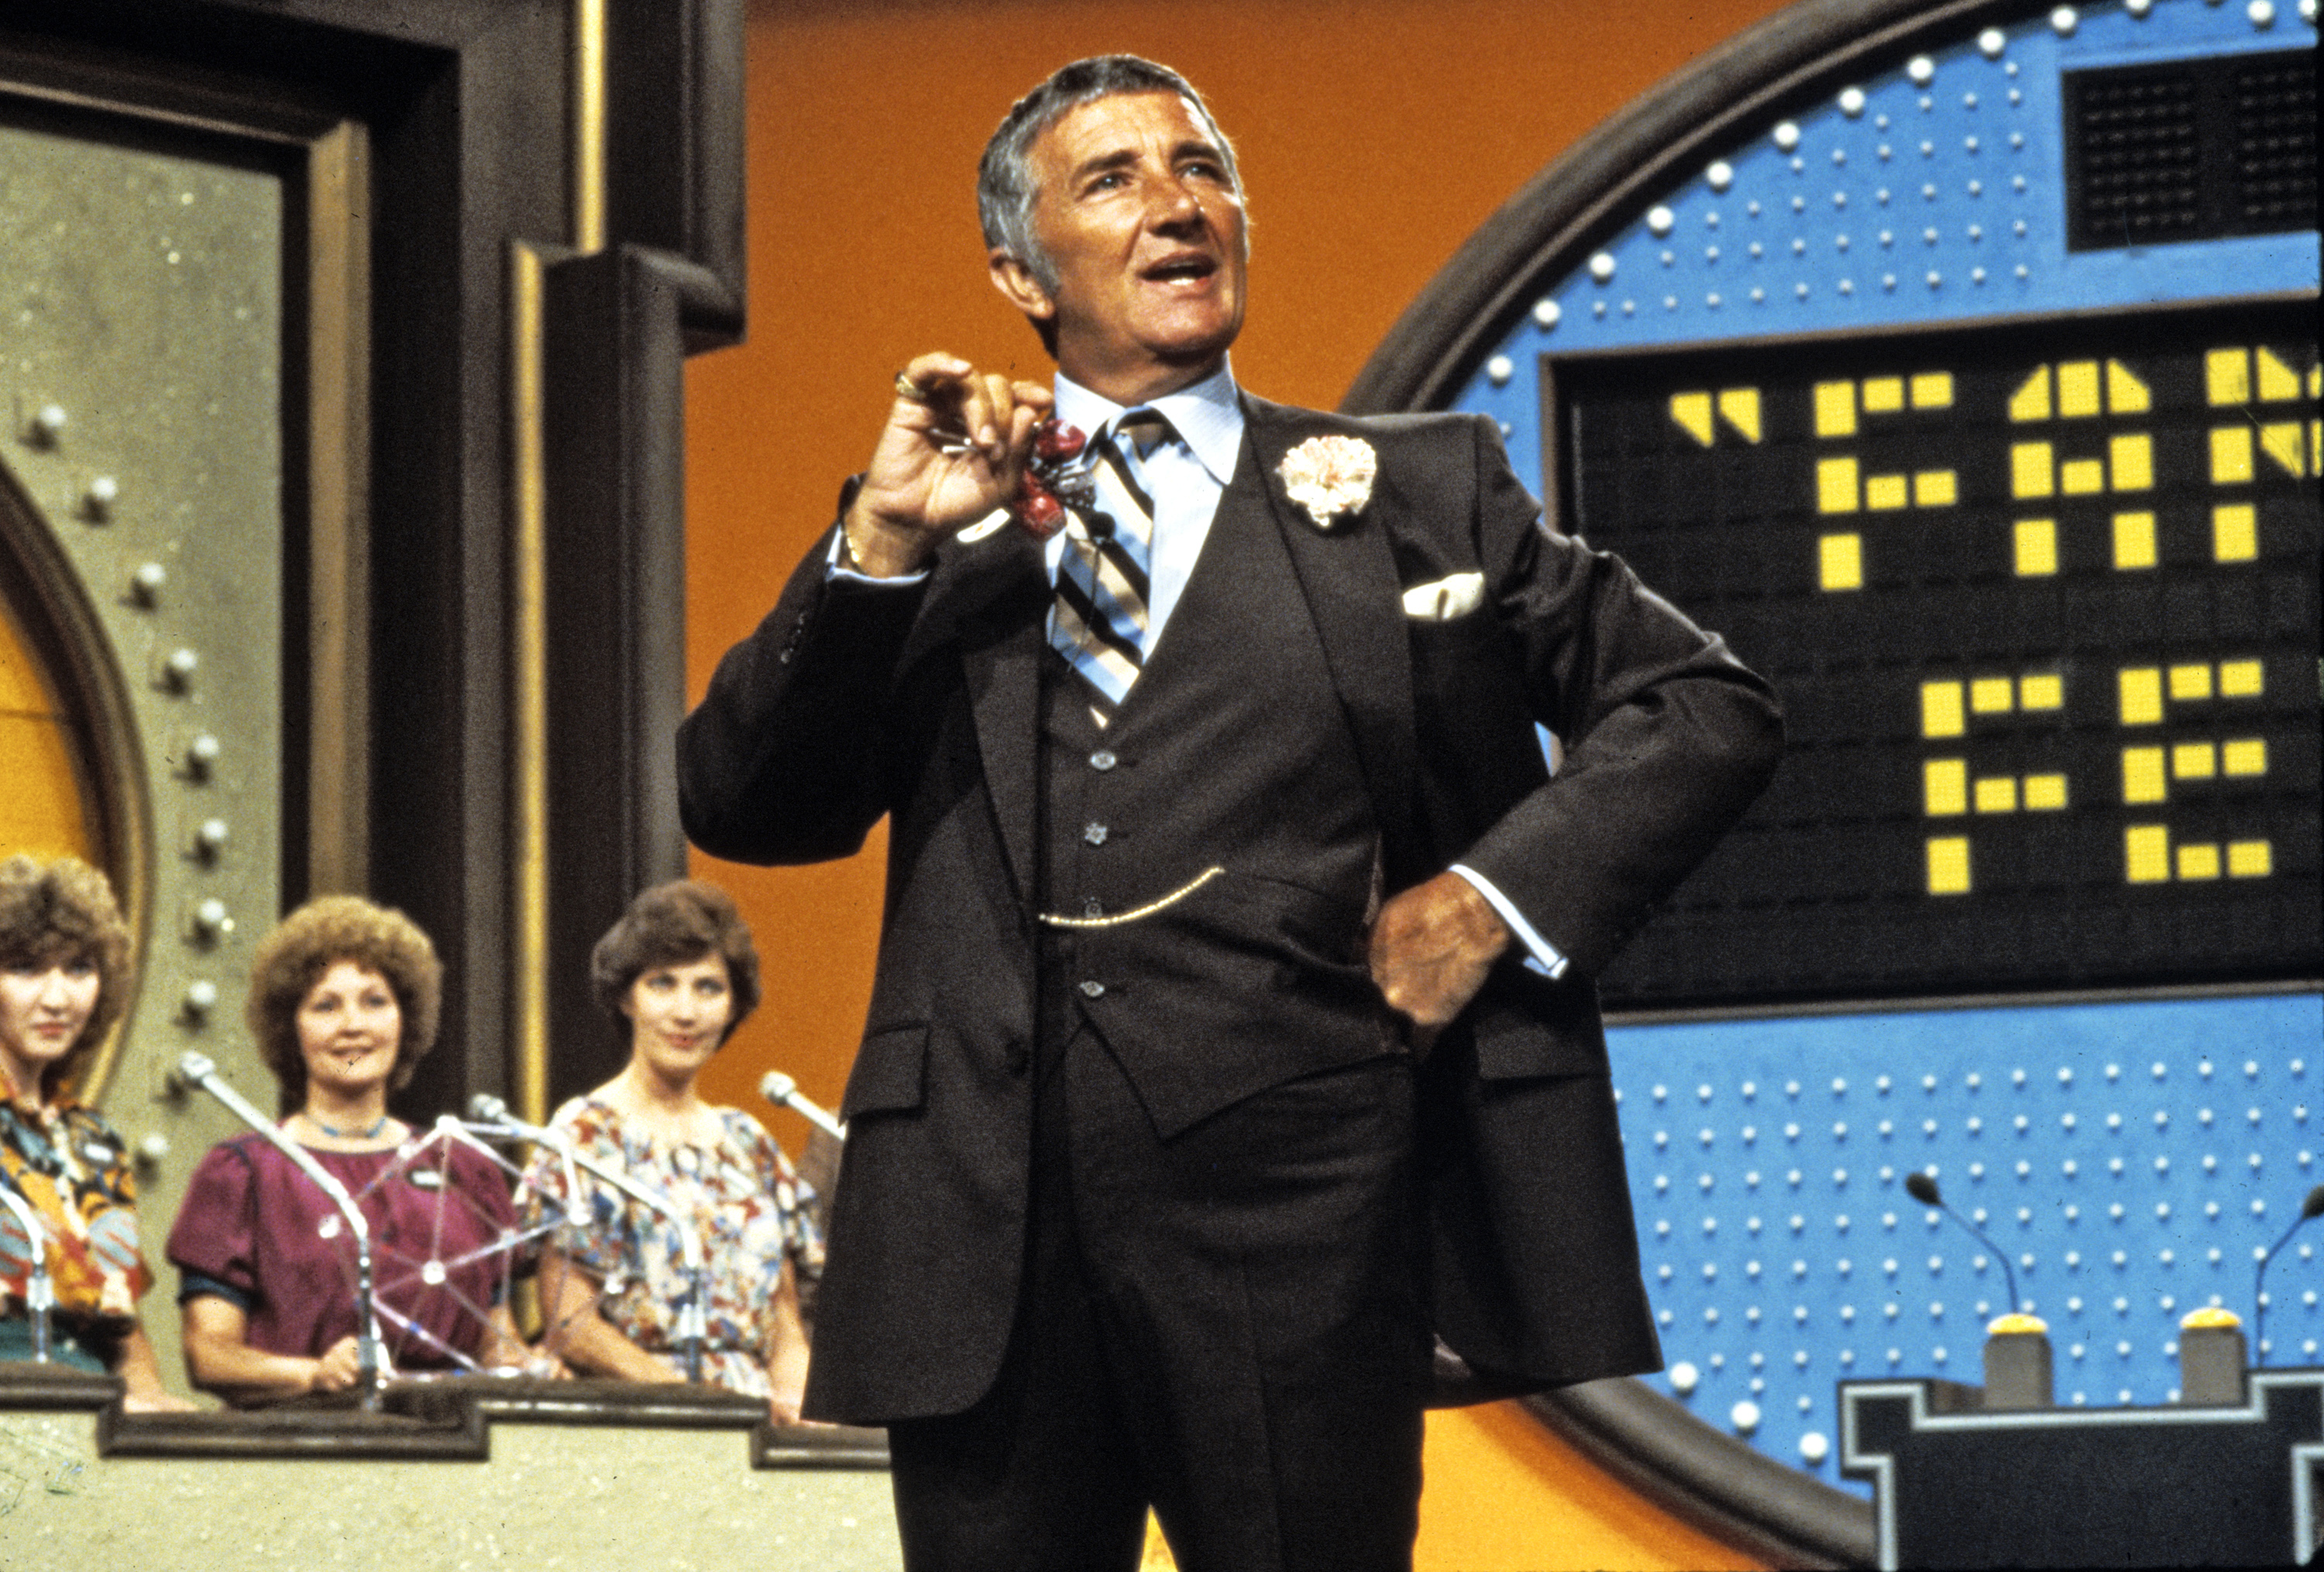 Family Feud: The Richard Dawson Game Show Debuted 40 Years Ago - canceled TV shows ...